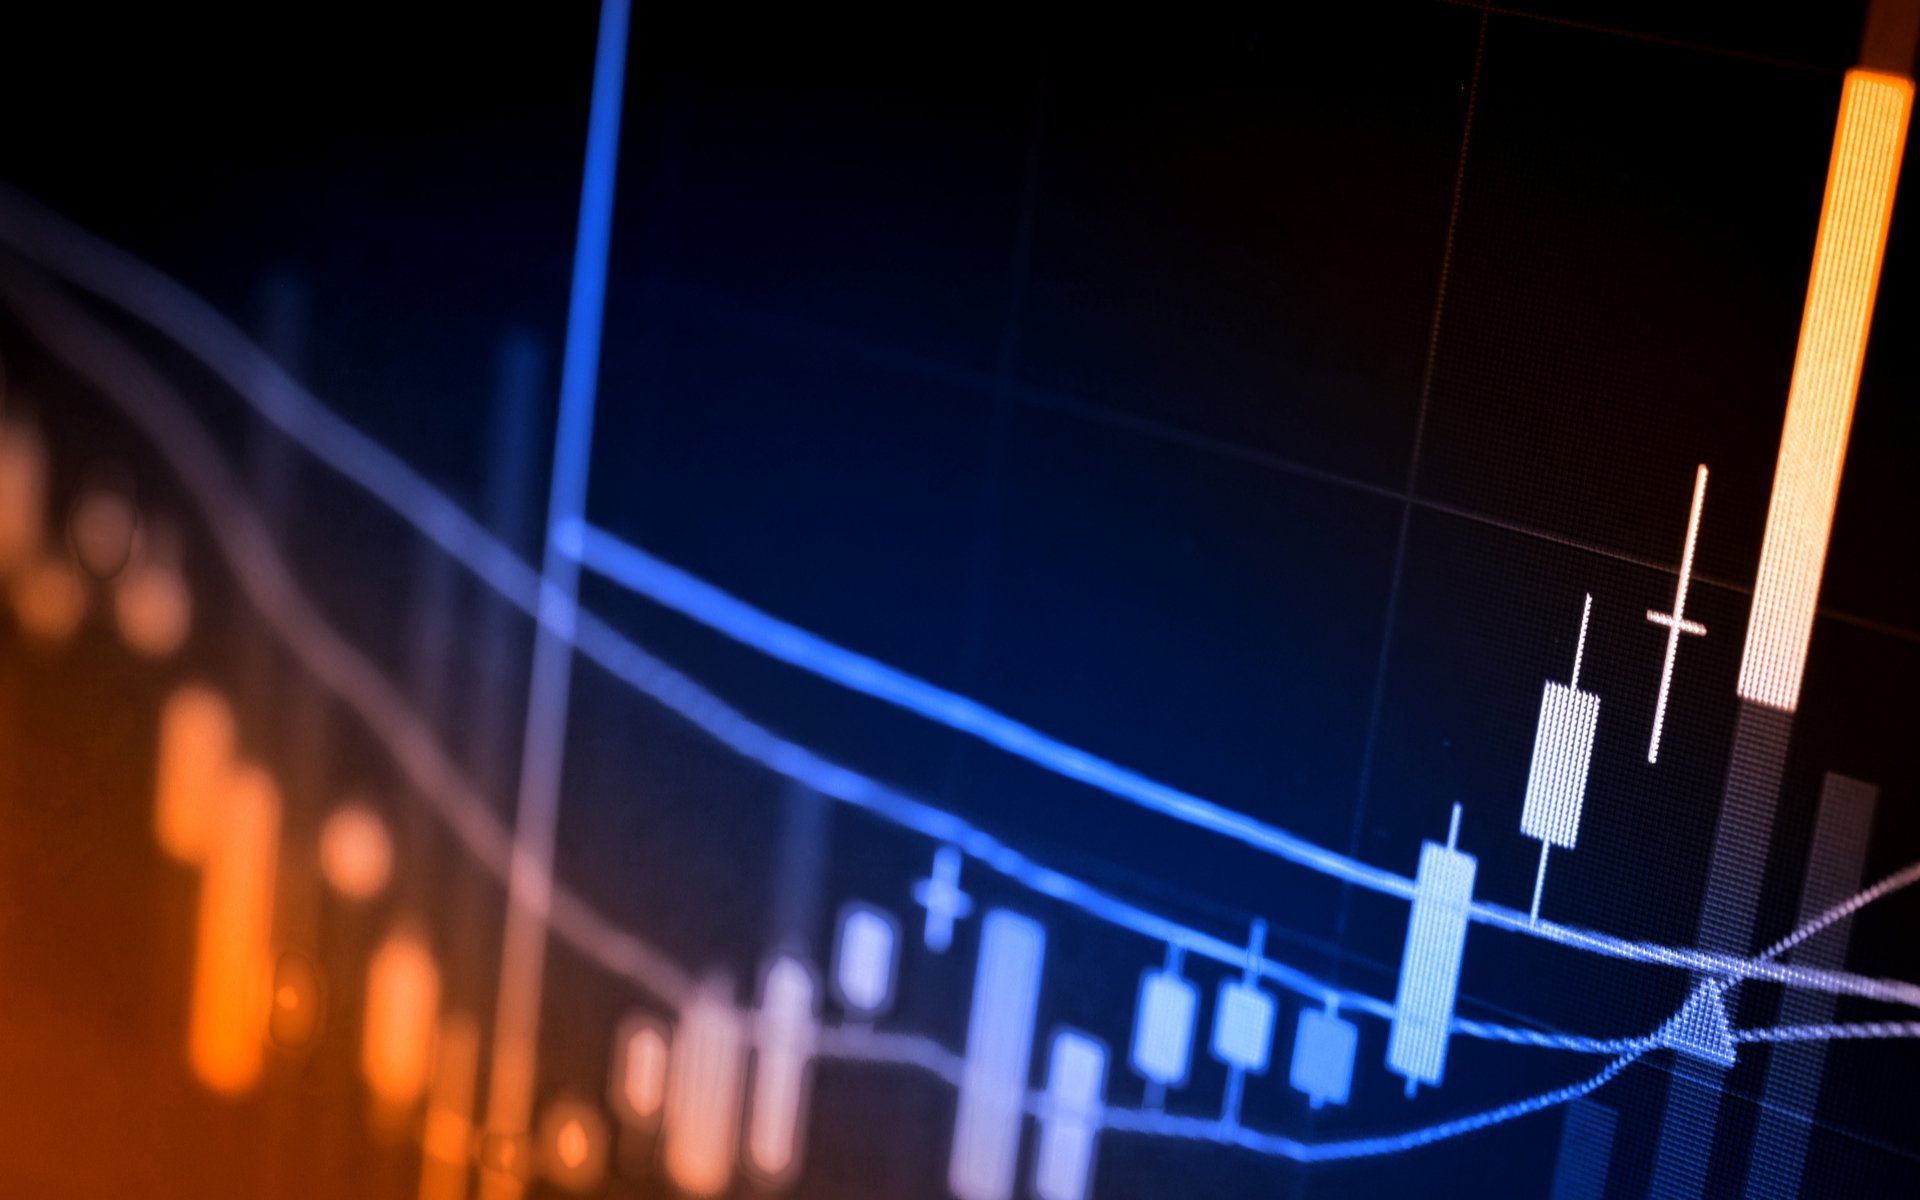 Bitcoin Price Analysis: Is this a Relief Rally or a Bullish Reversal?